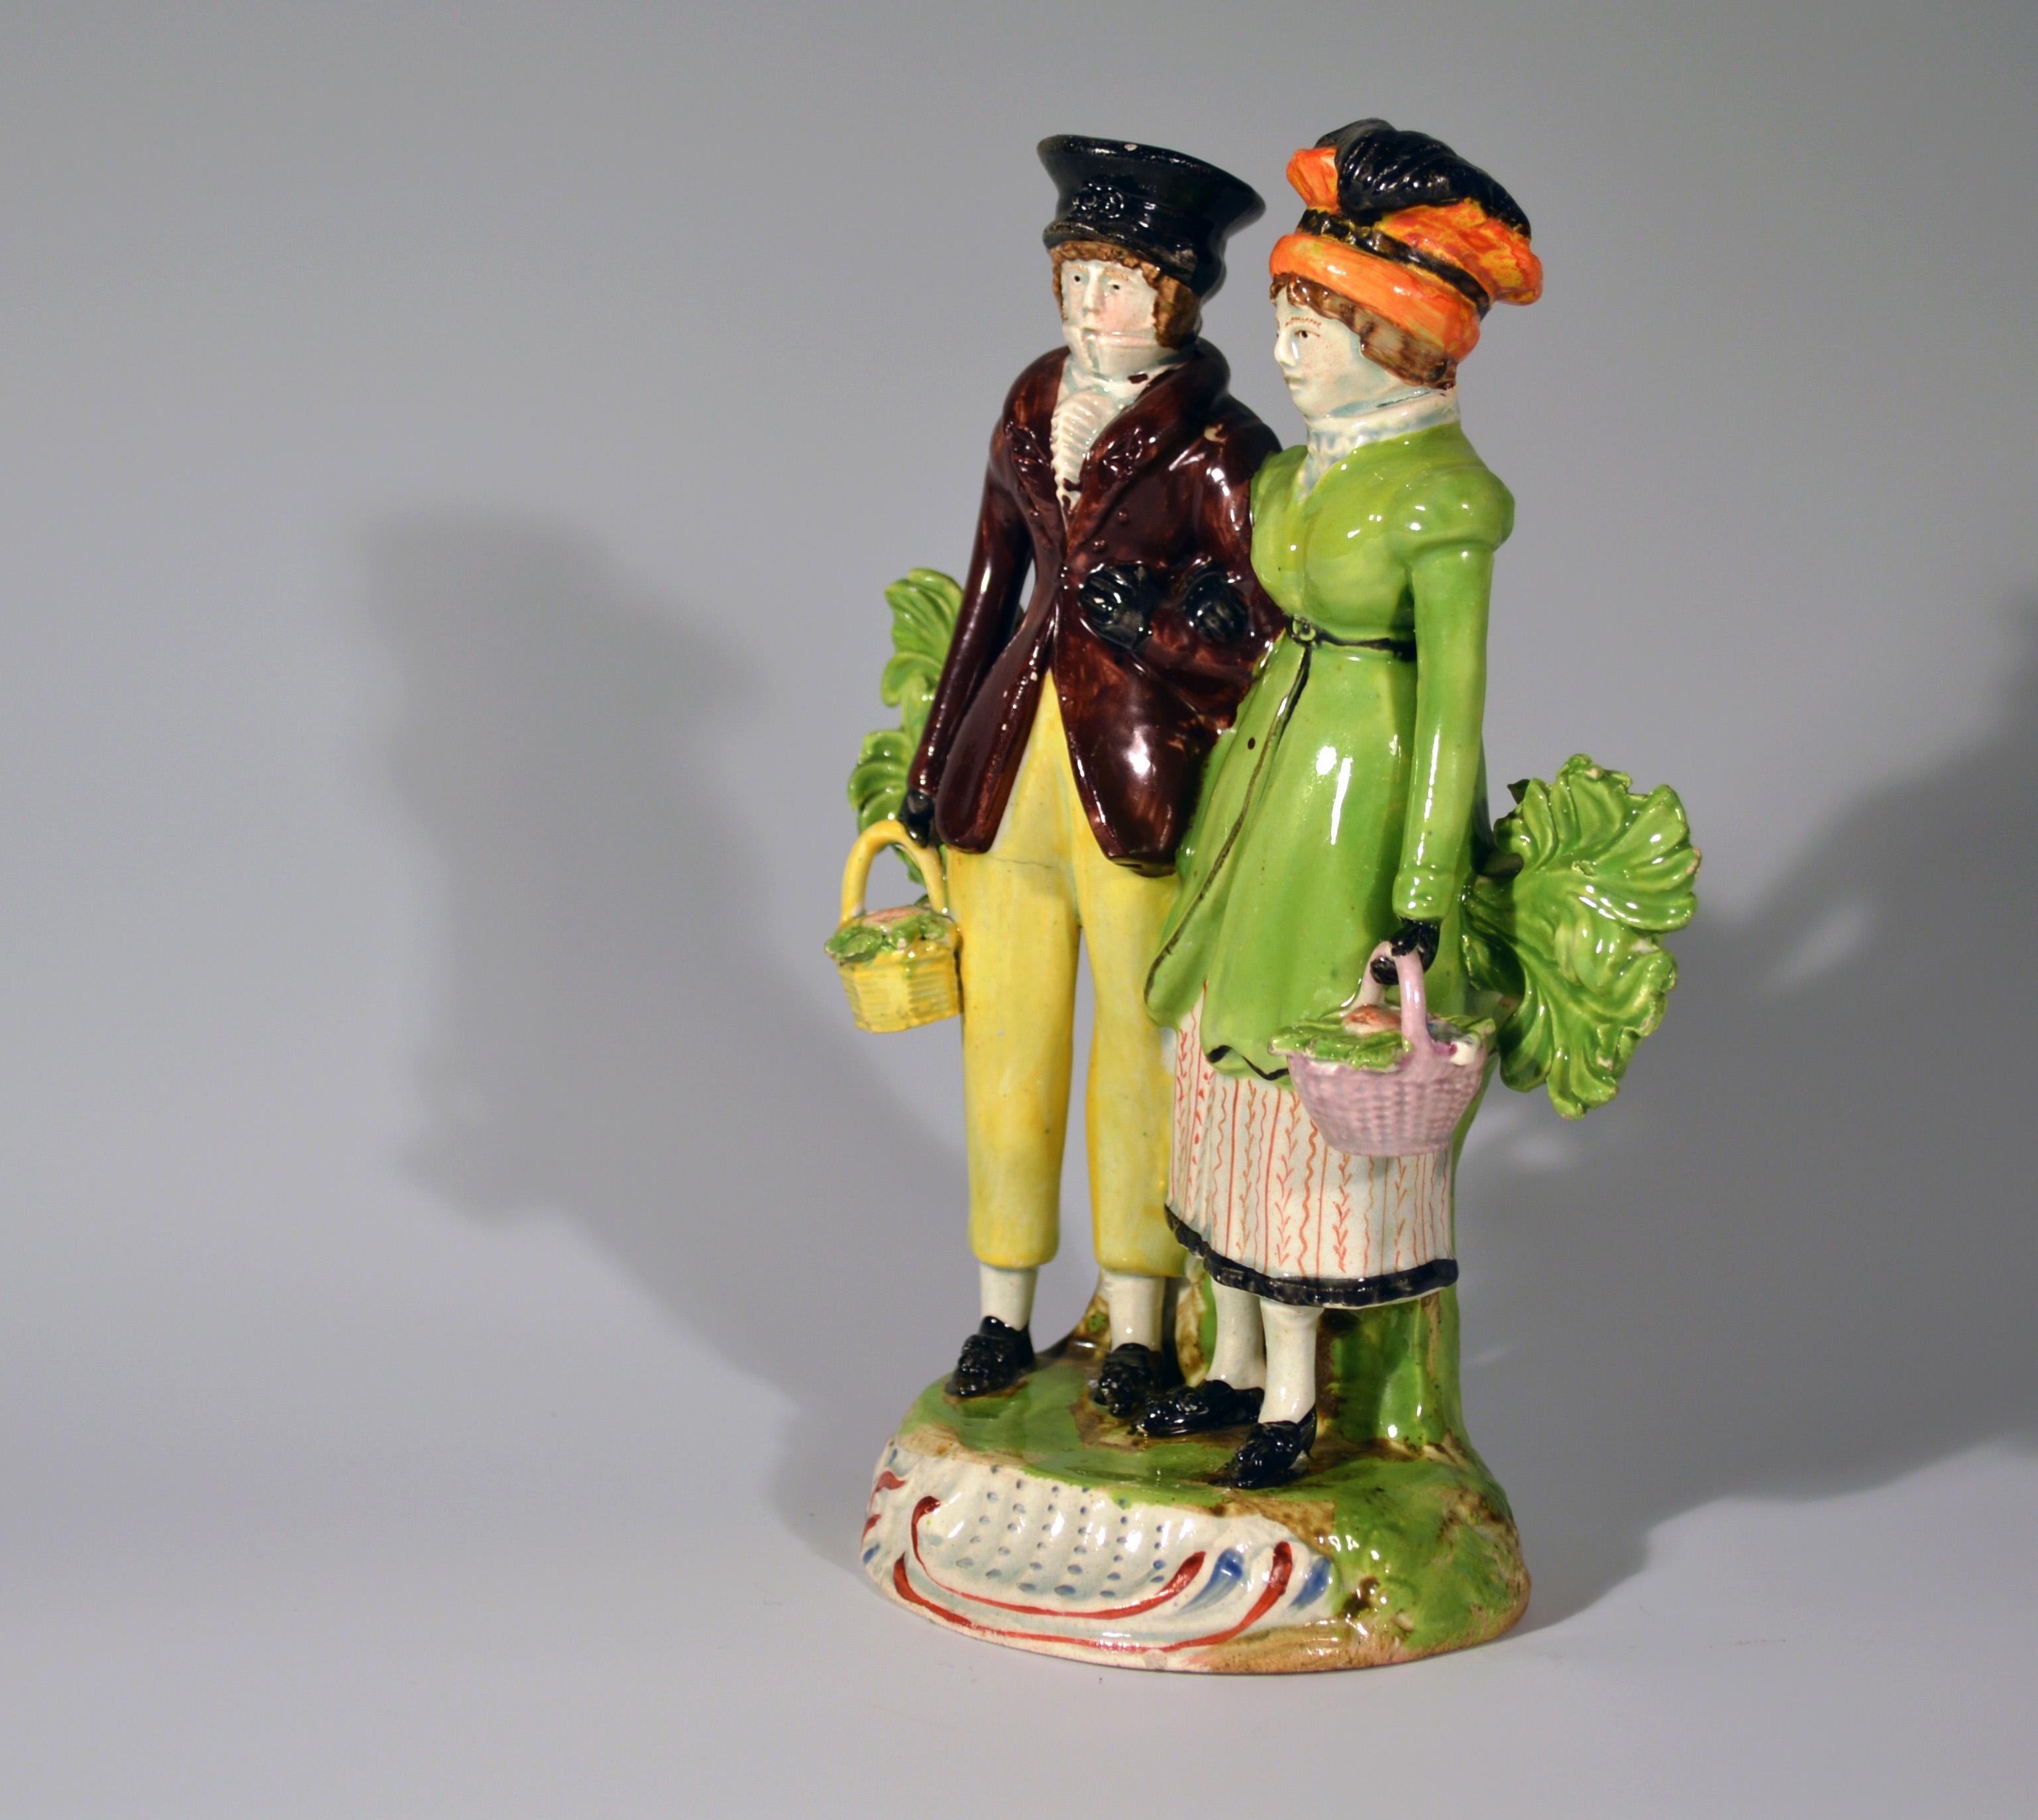 19th Century Staffordshire Group of Courting Couple or Dandies, circa 1825